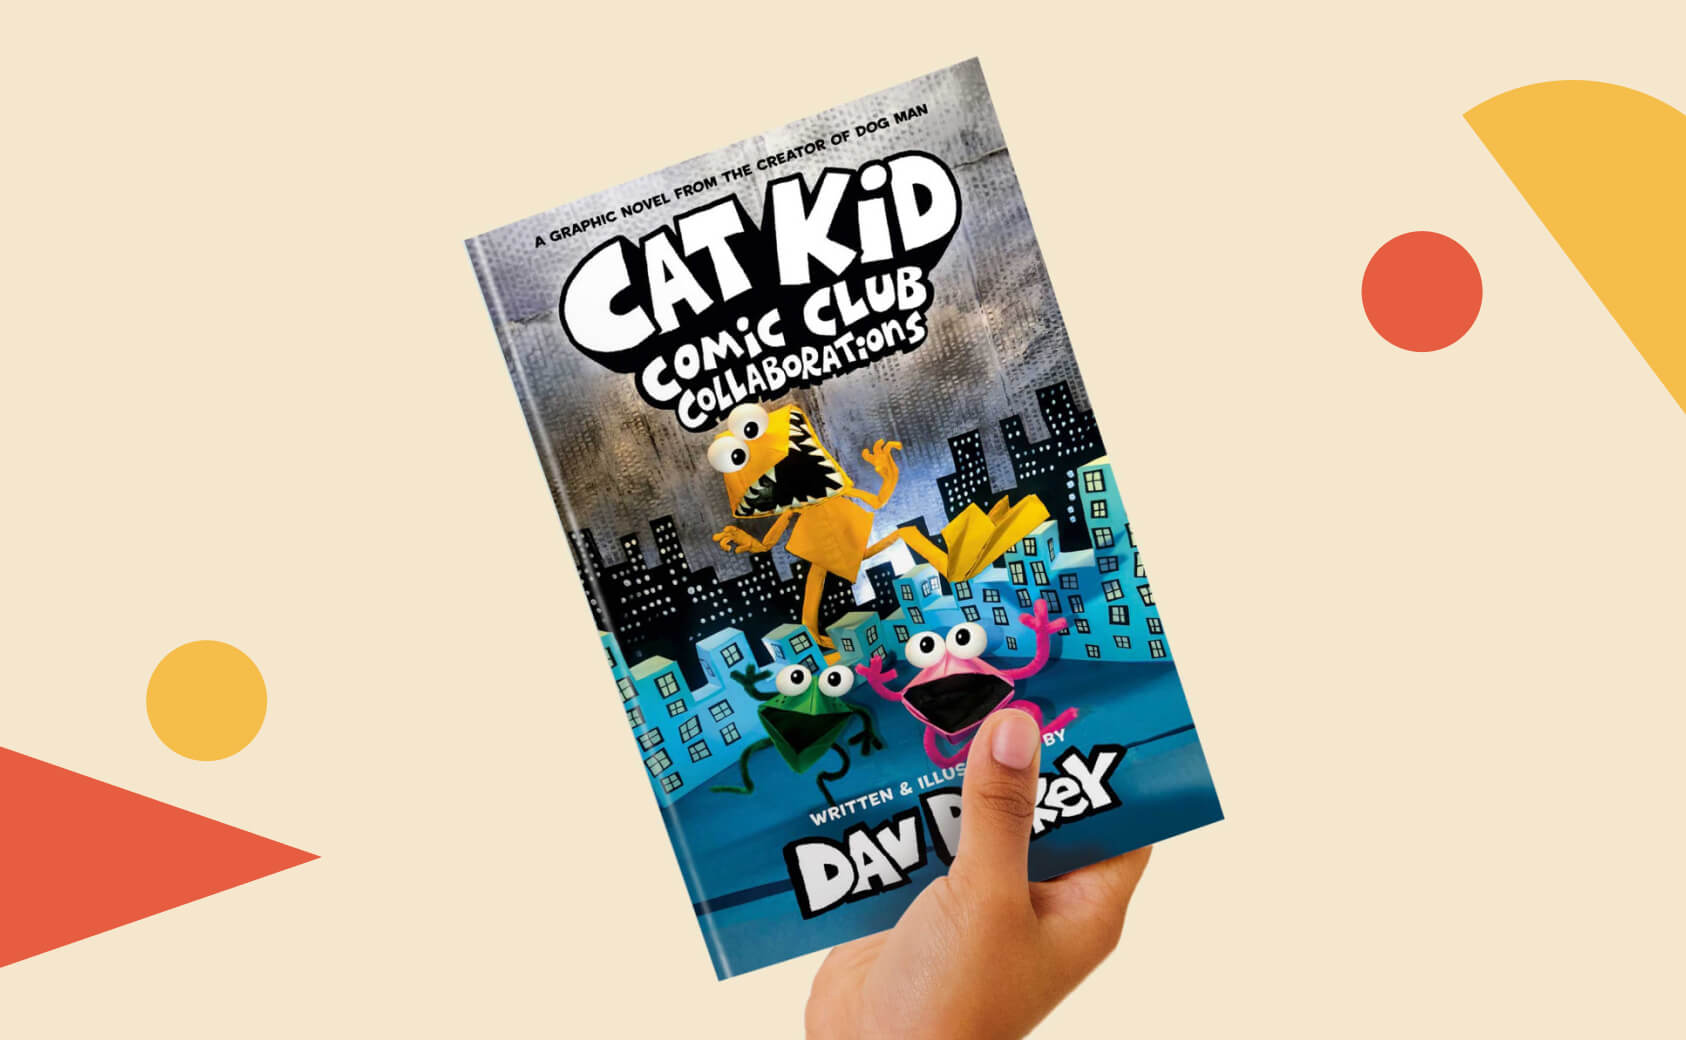 The latest release from Dav Pilkey - Cat Kid Comic Club Collaborations